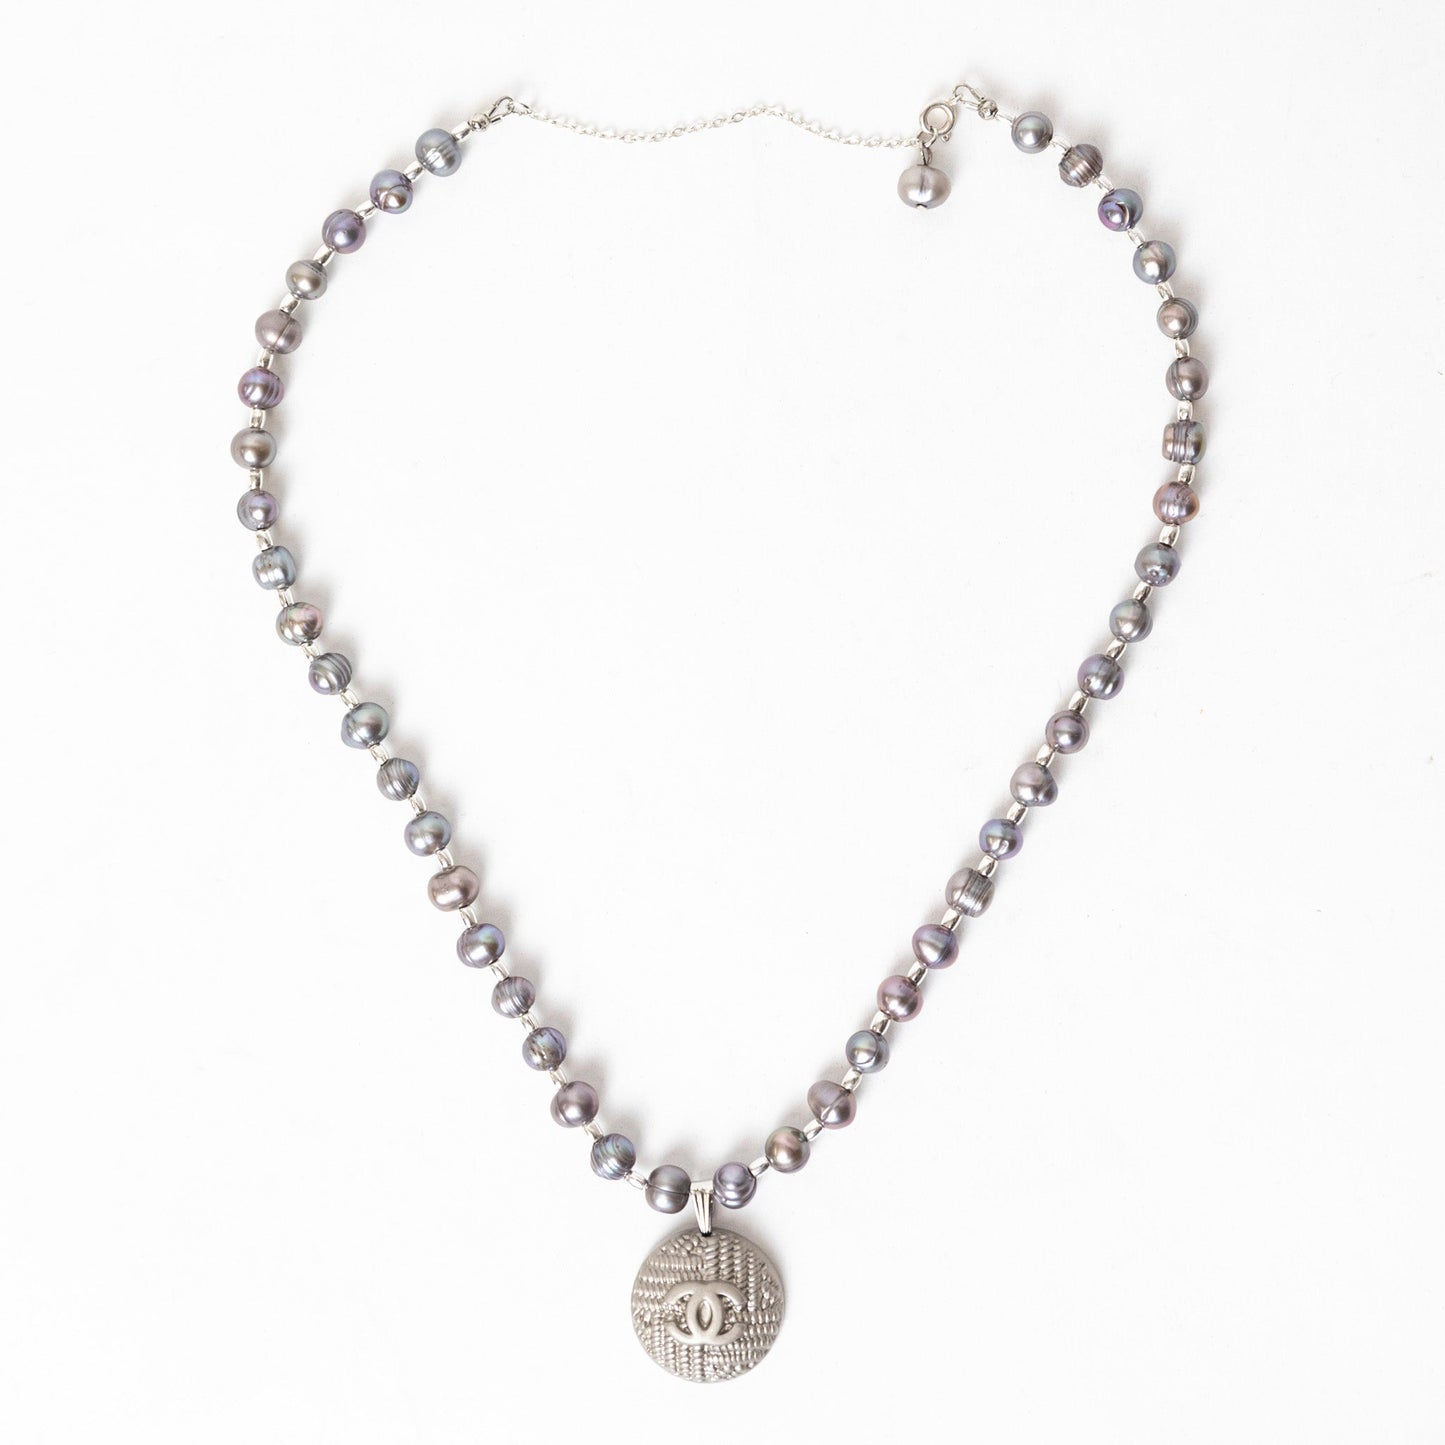 VT Rework: Chanel Pearl Chain Necklace